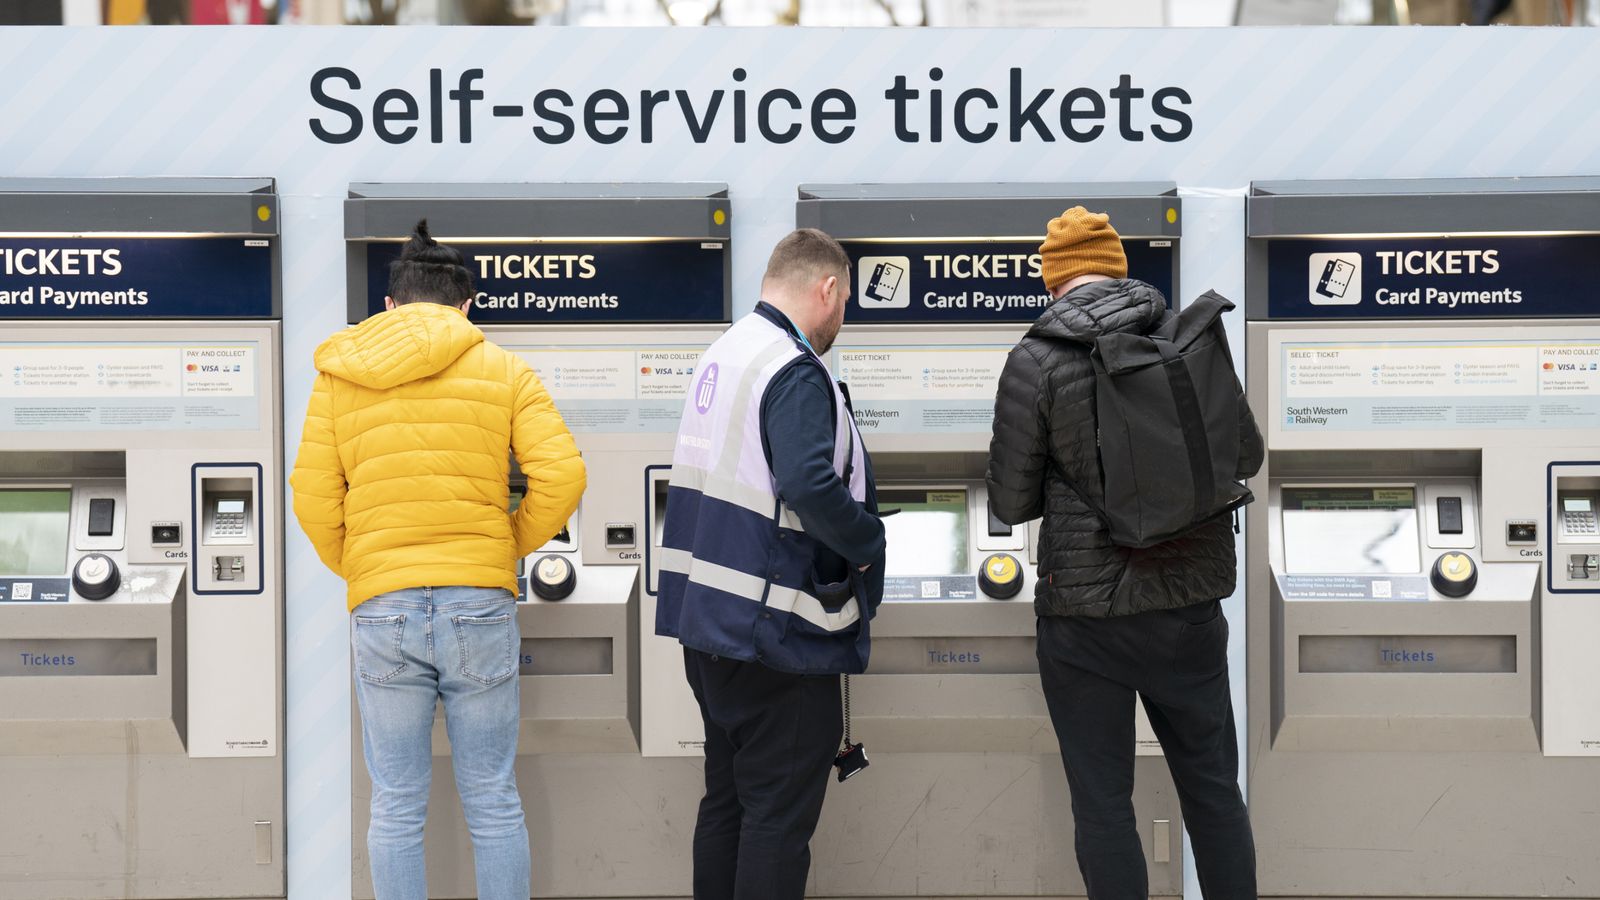 Railway station ticket machines charging more than twice as much as Trainline, study by Which? finds